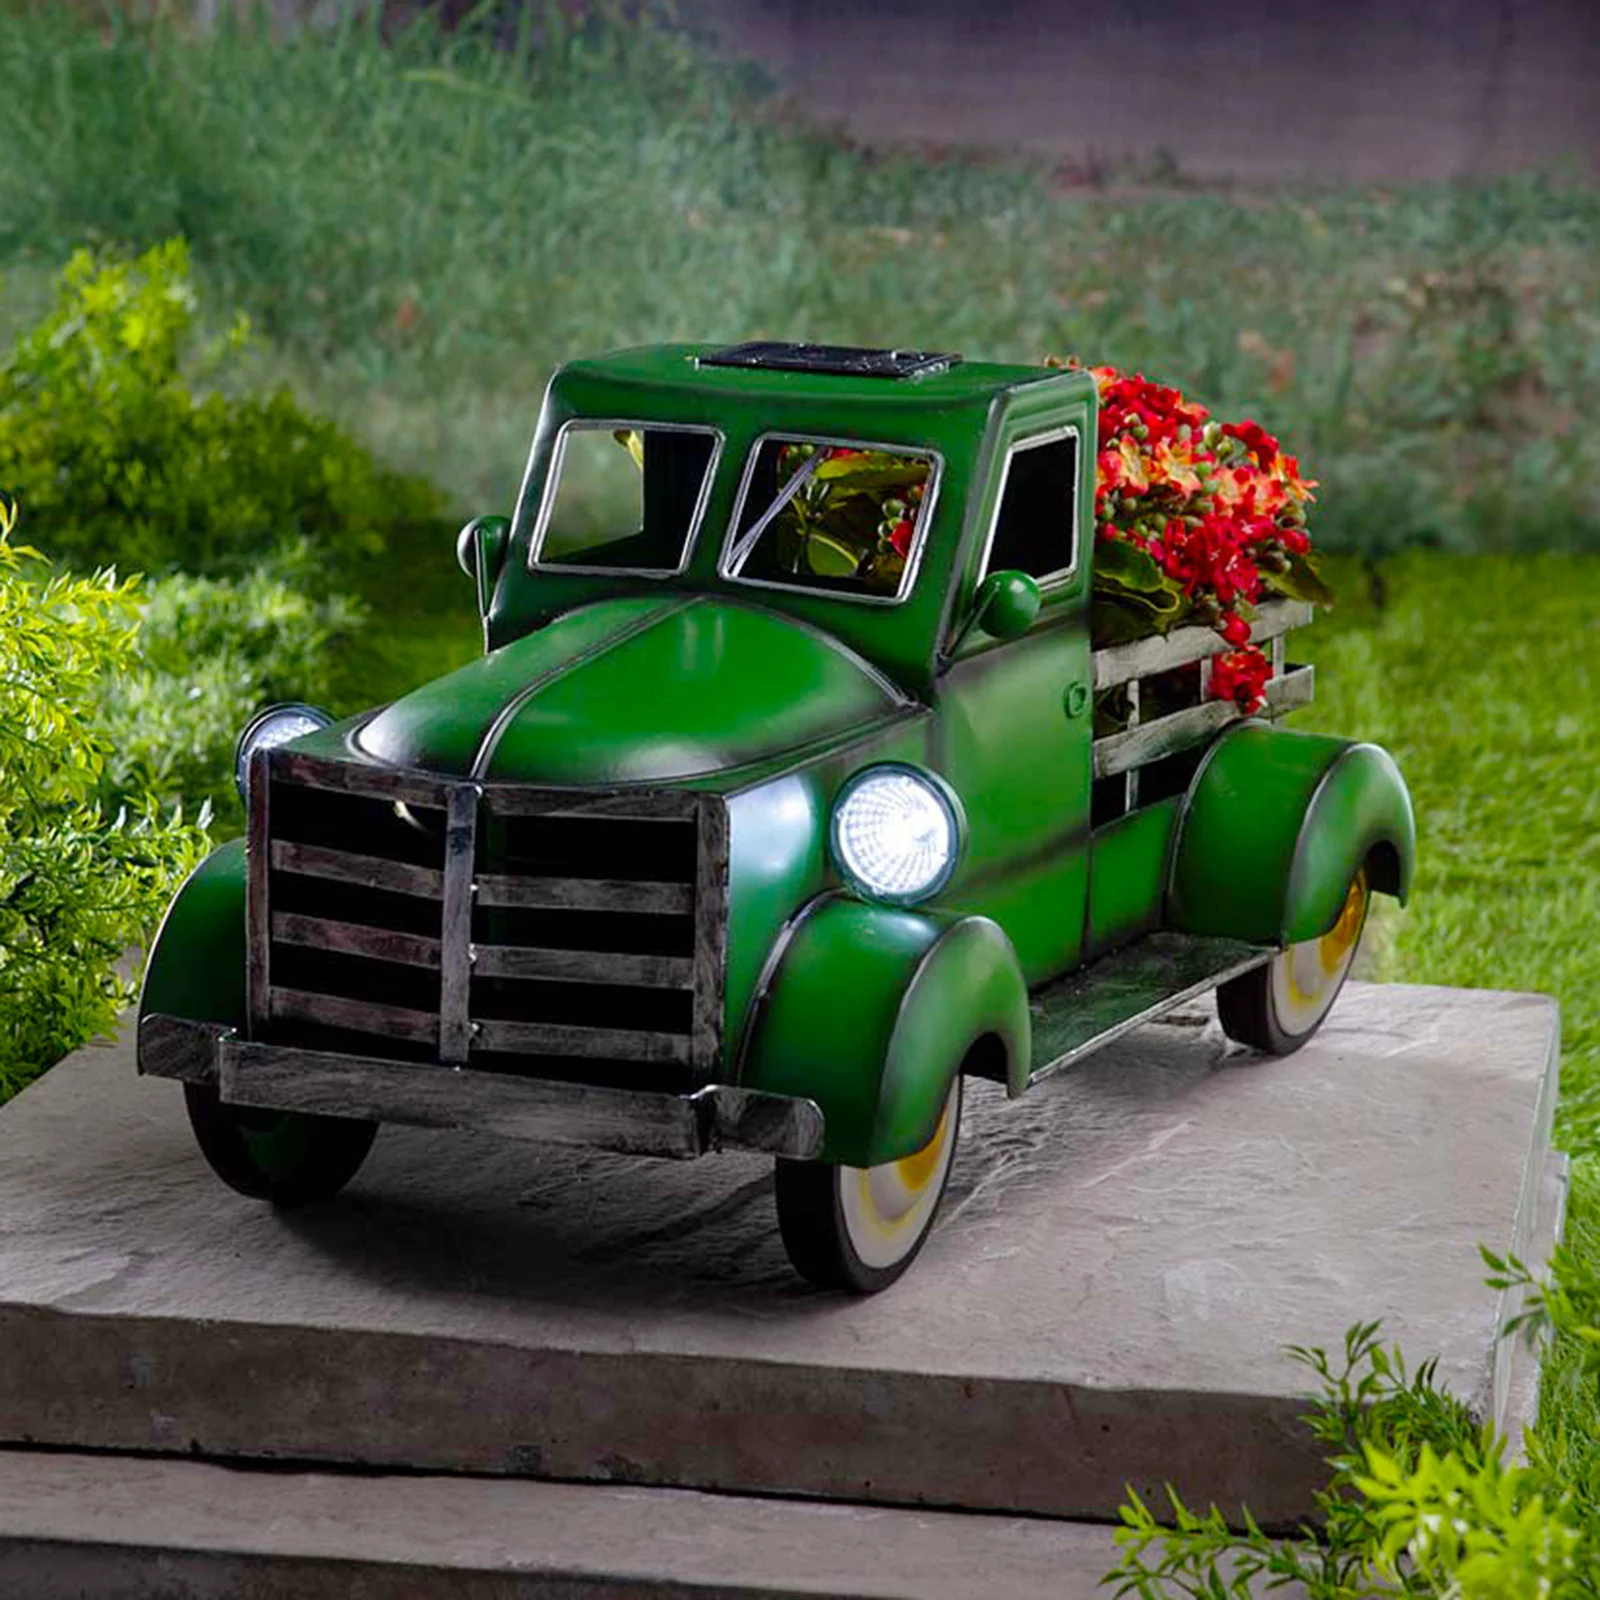 Solar Powered Hand Painted Mini Vintage Bus Statue for Home Office Desktop Table Ornament JACE 5 Solid Colors Truck Flower Pot with LED Car Light Retro Solar Pickup Truck Garden Decoration Army Green